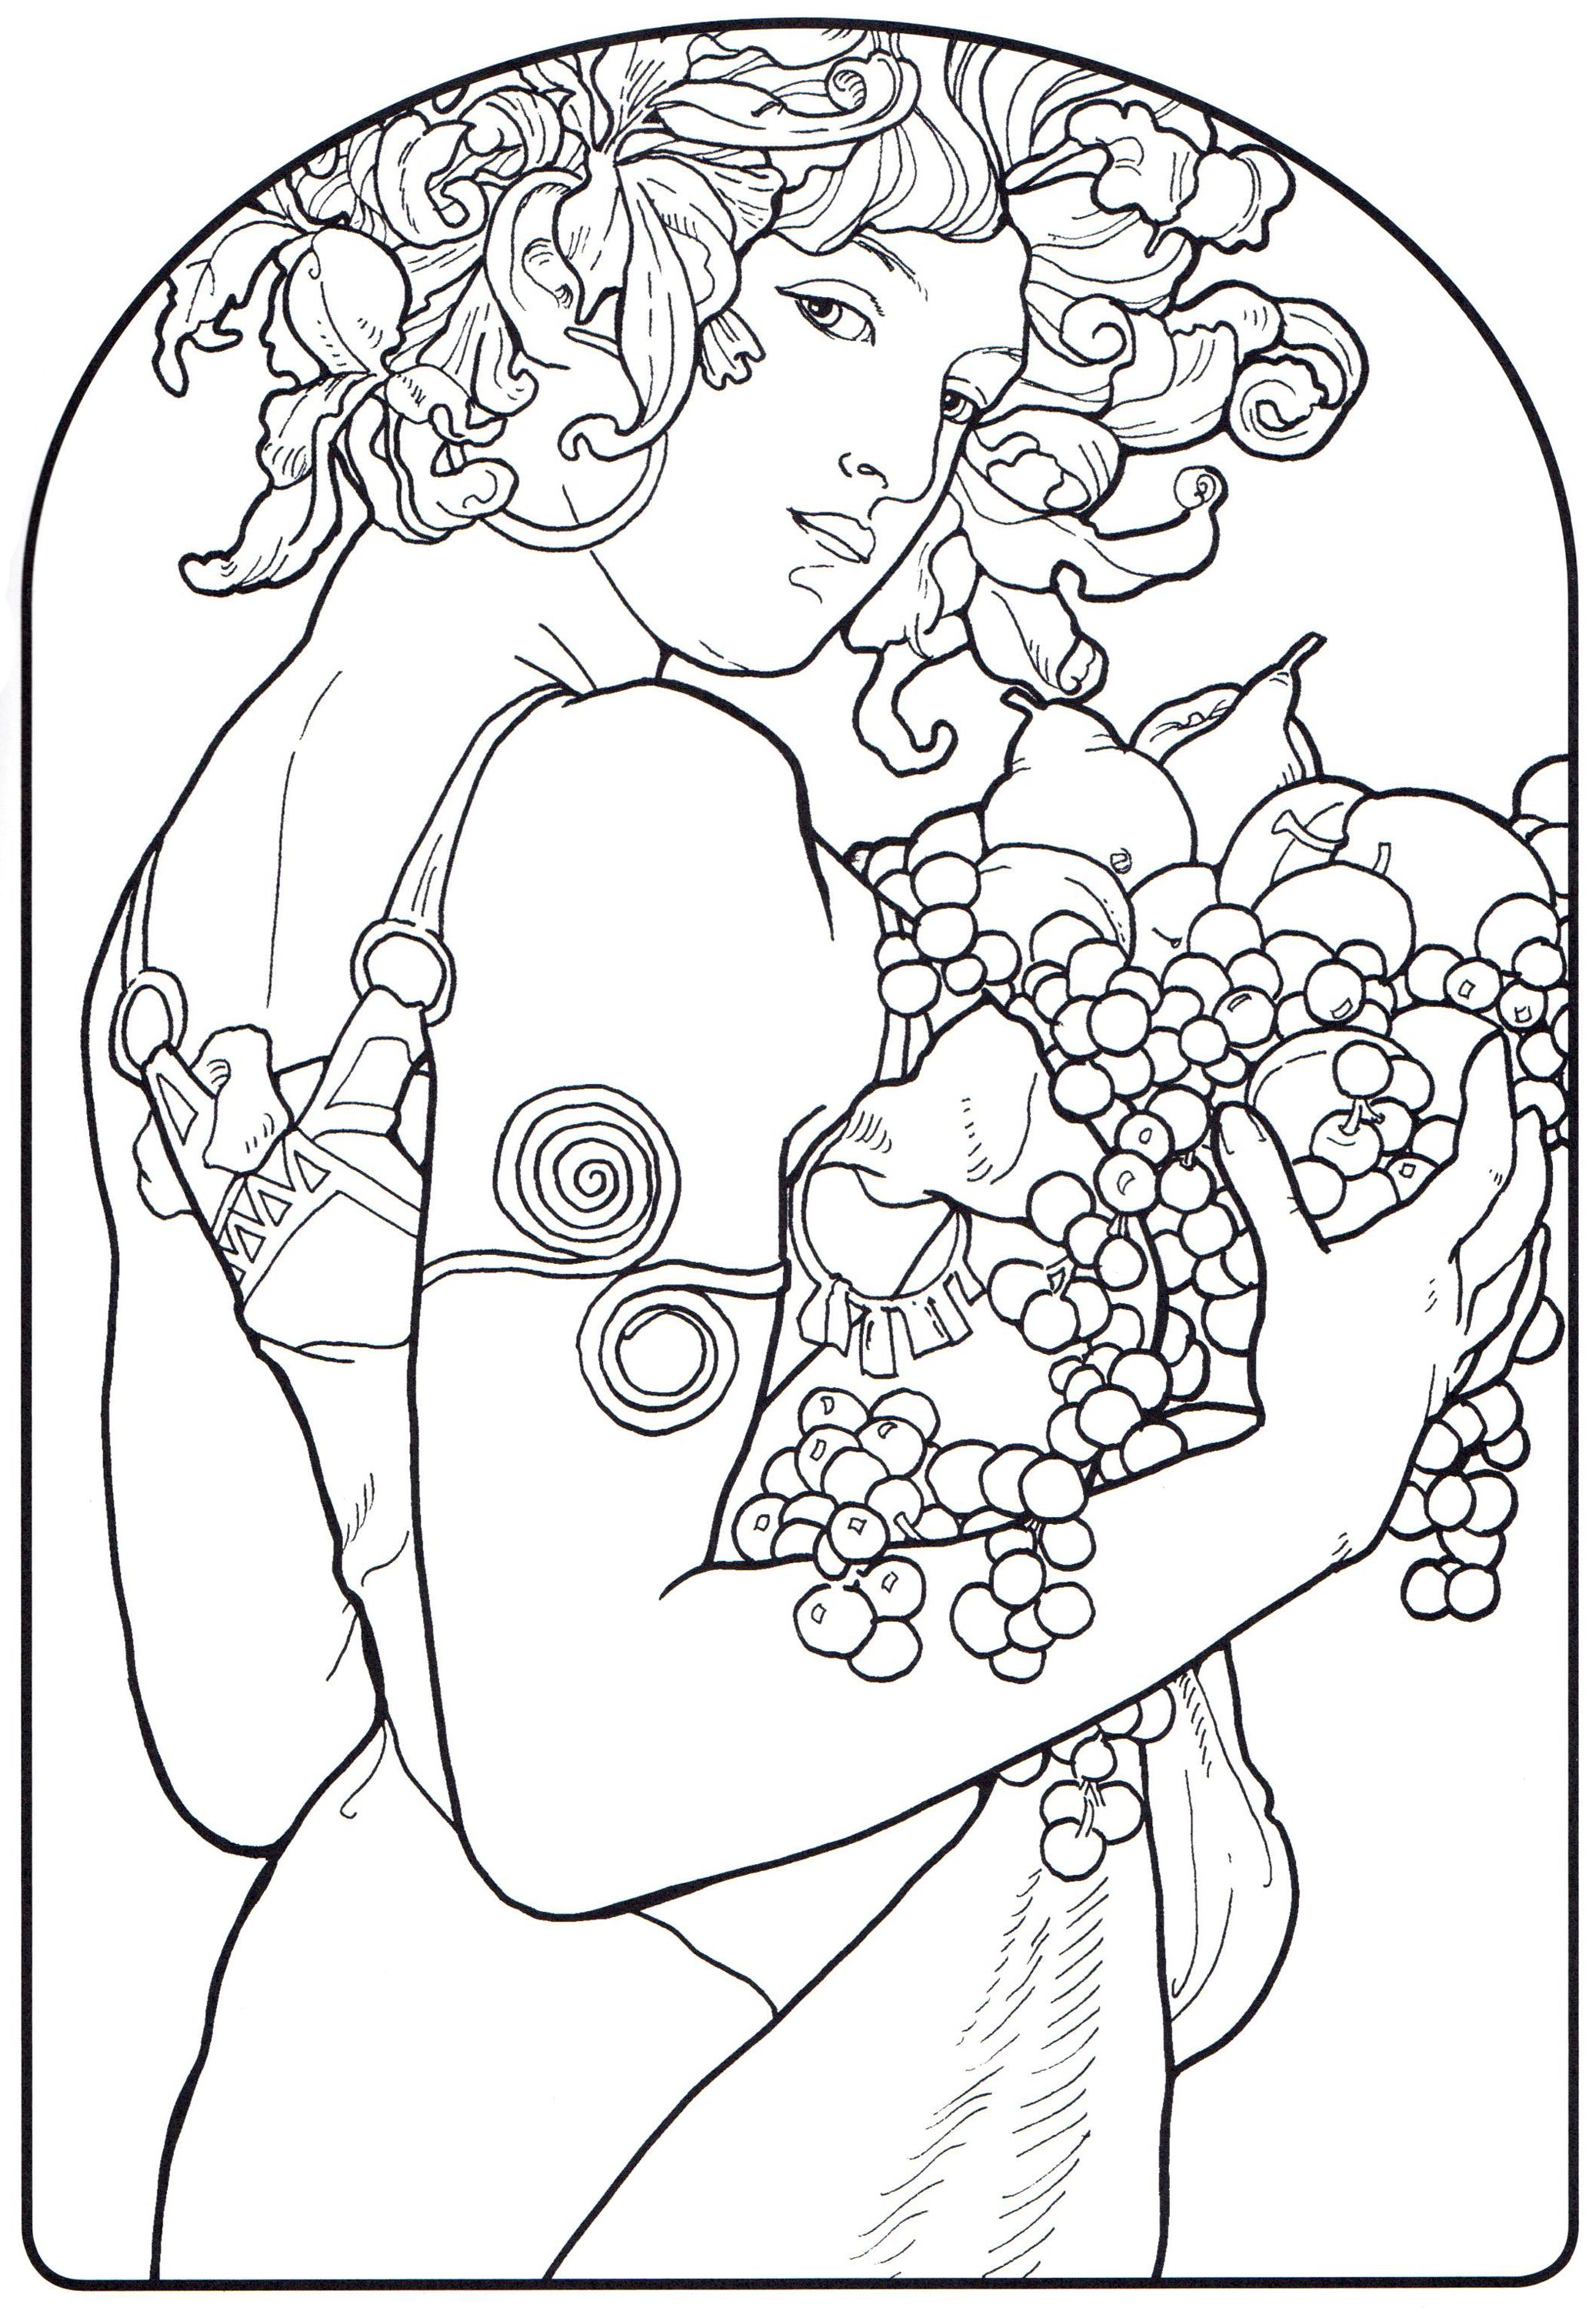 Coloring Pages Art - Coloring Home